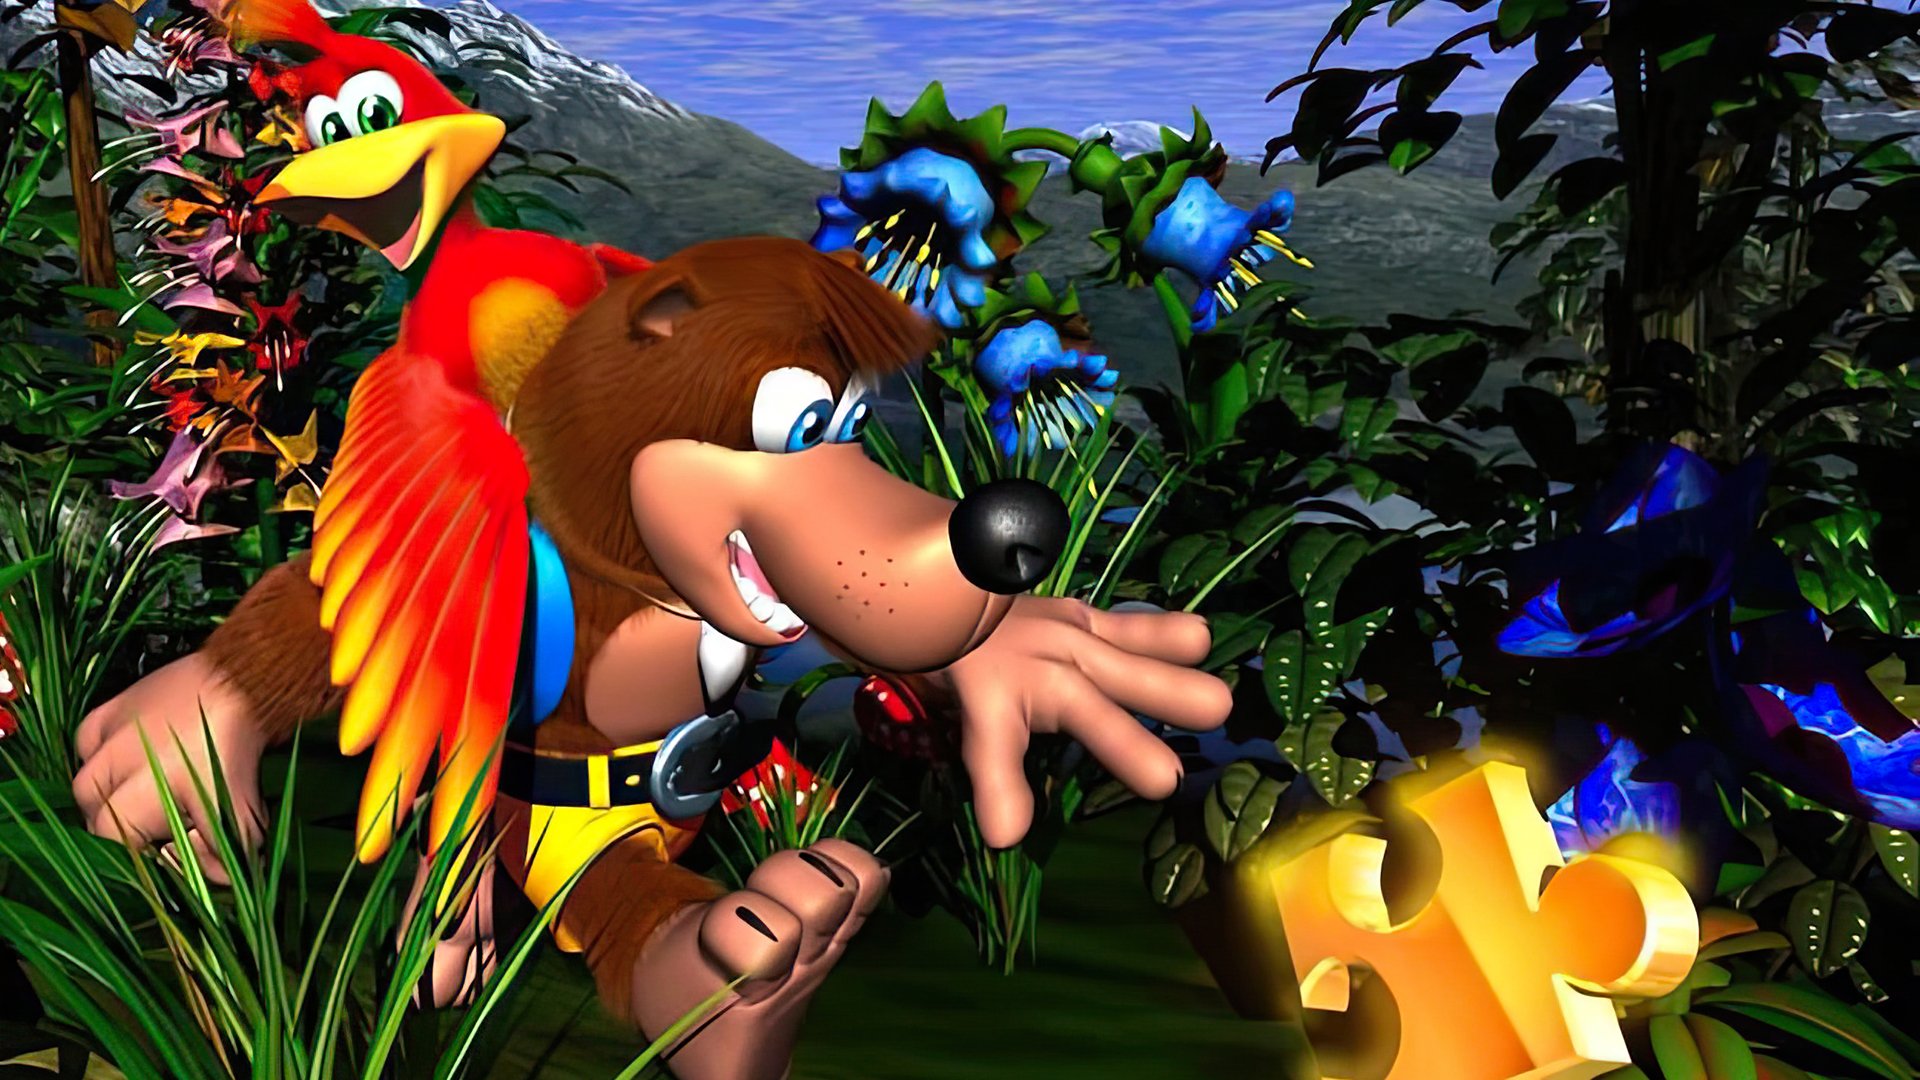 Banjo-Kazooie’s fabled Stop N Swop feature has finally been managed on original N64 hardware